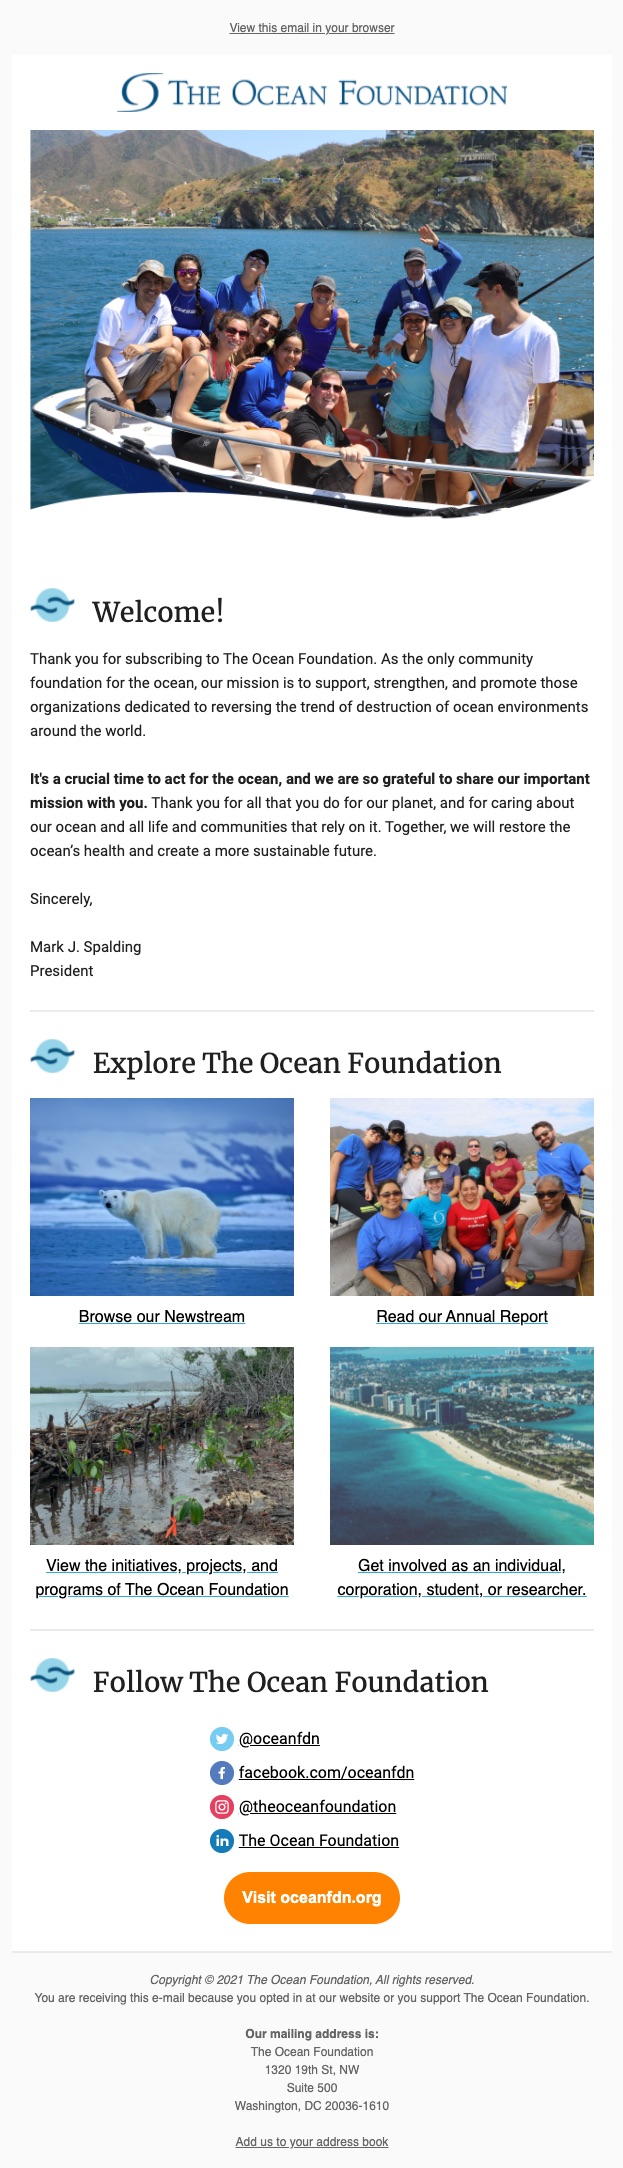 The Ocean Foundation nonprofit newsletter welcome